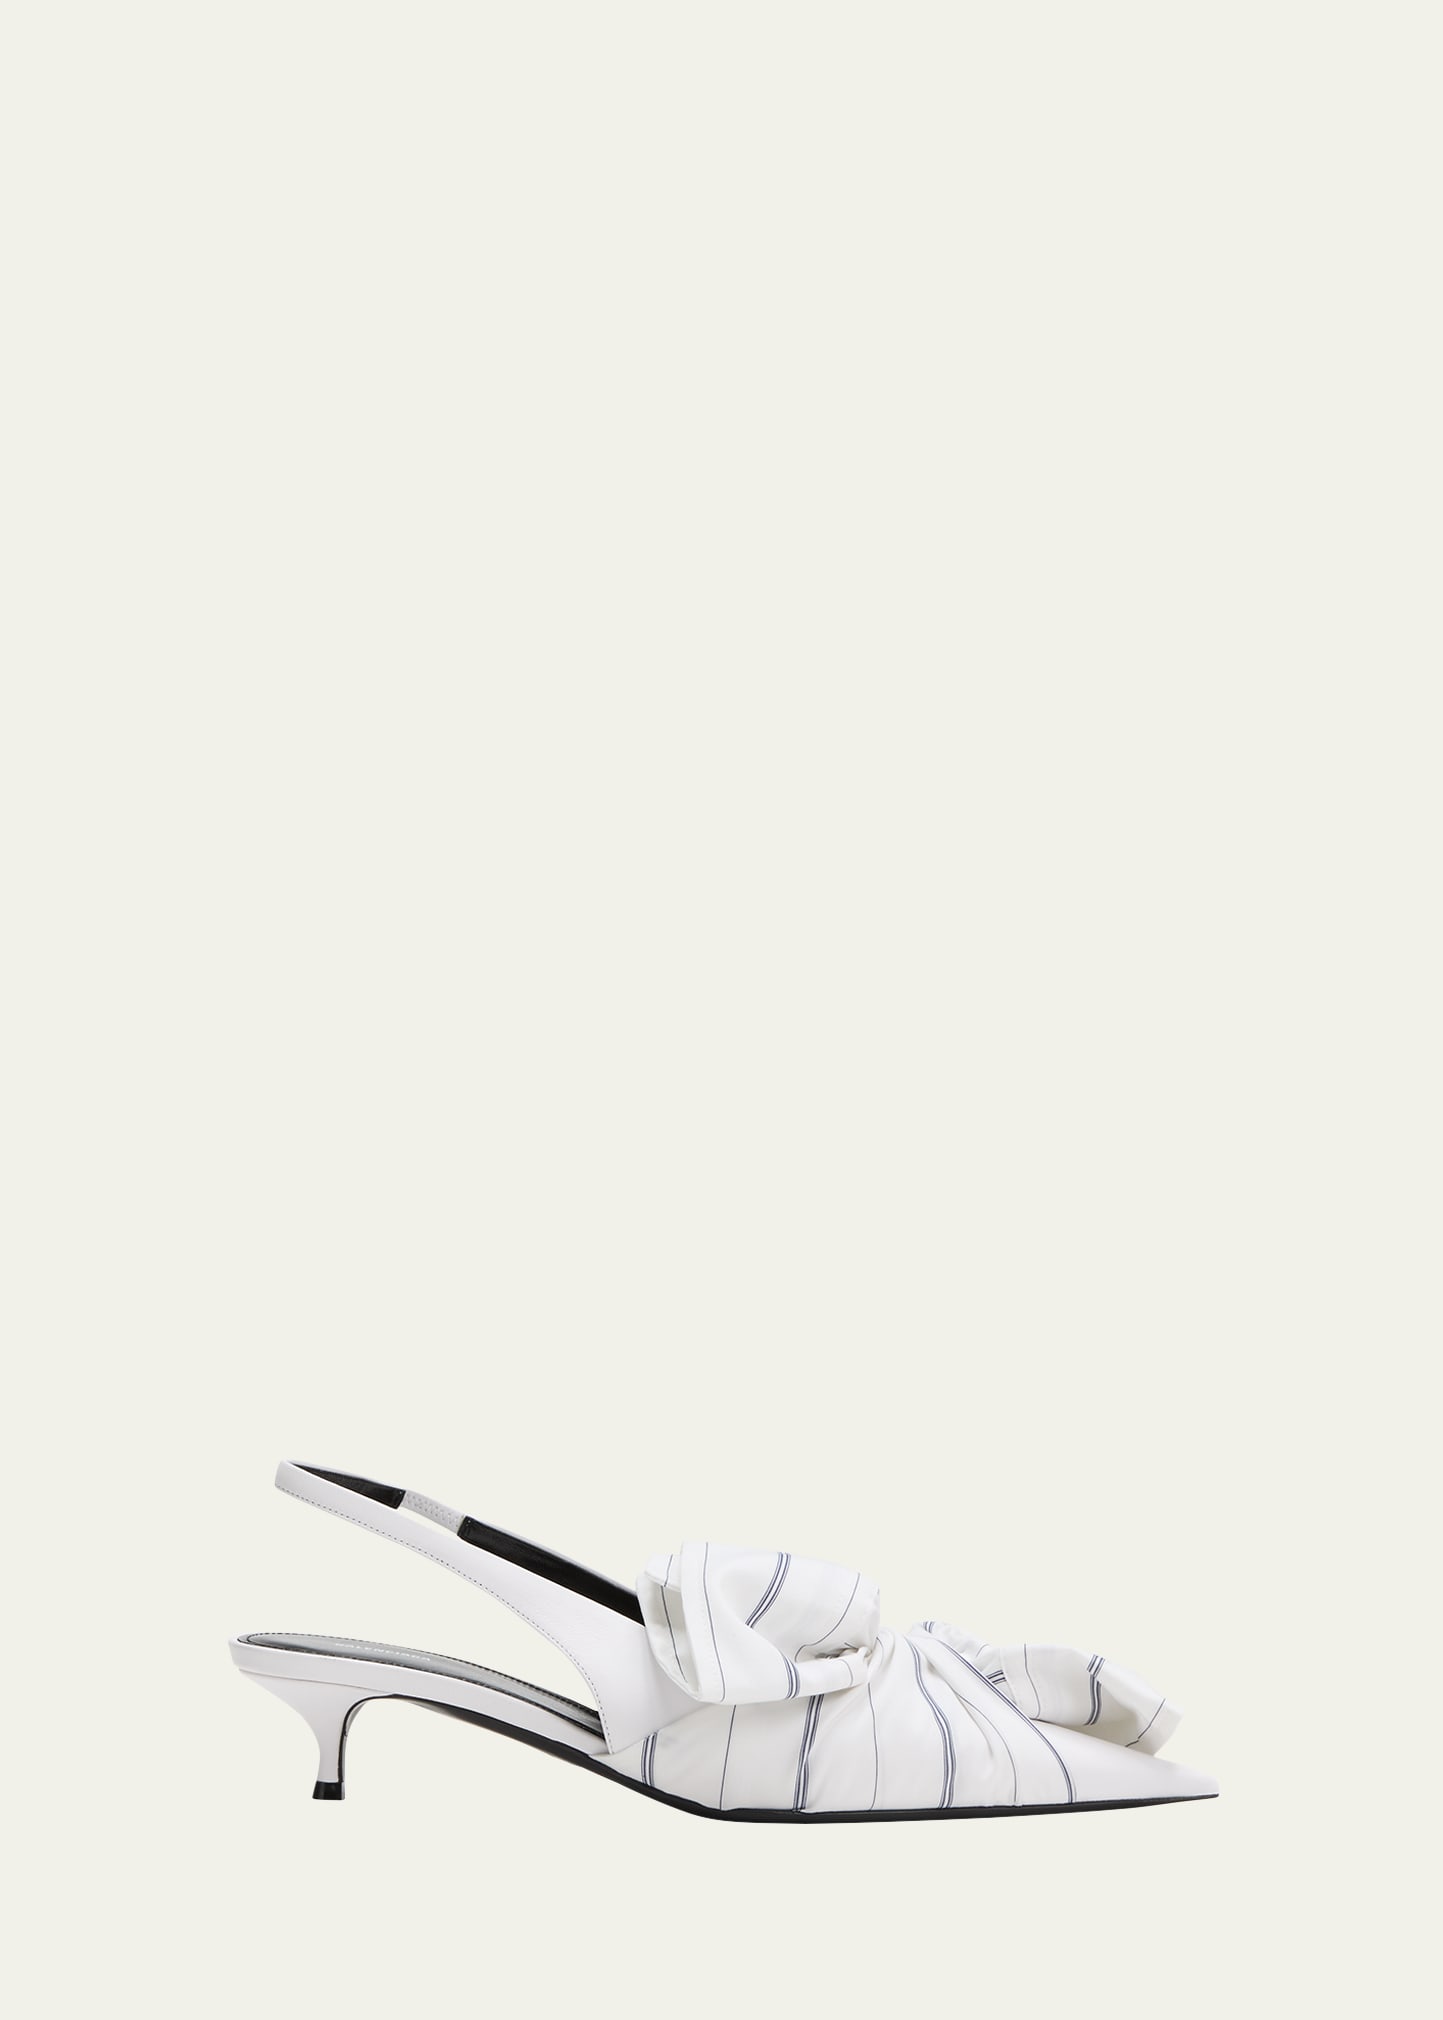 Shop Balenciaga Sleeve Knotted Twist Slingback Ballerina Pumps In 9000 White Navy